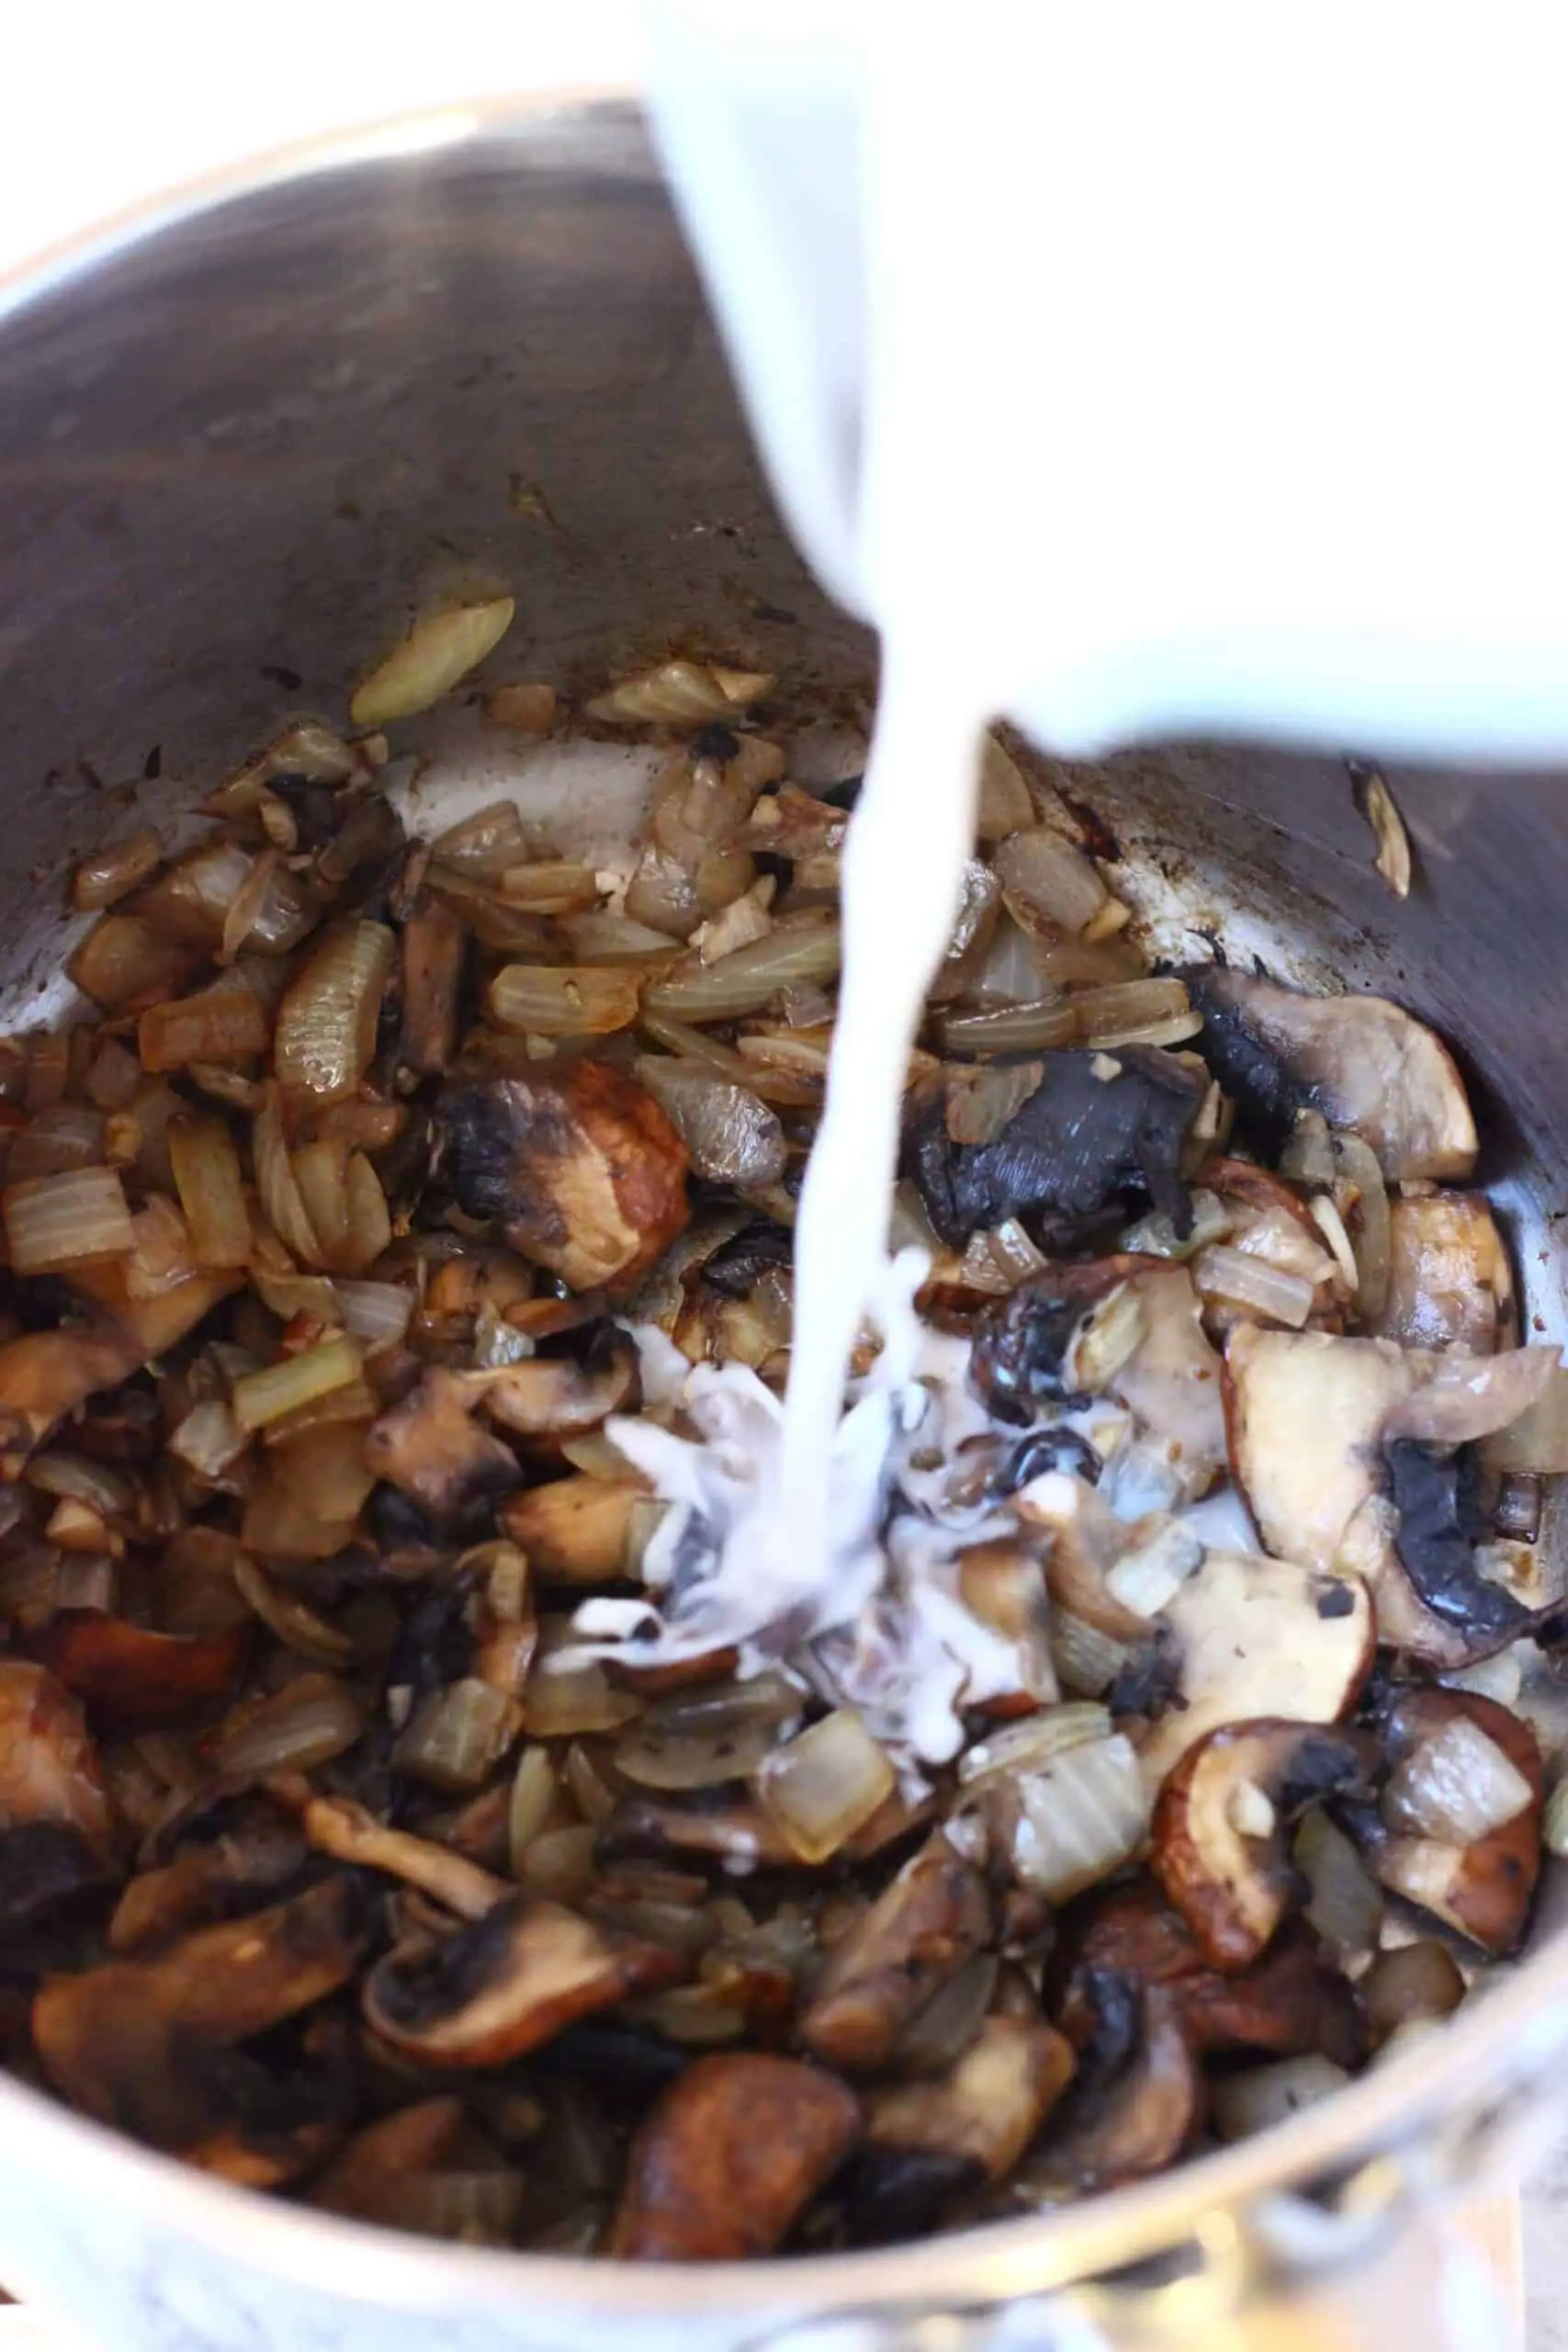 Sliced mushrooms in a pan with almond milk being poured into it